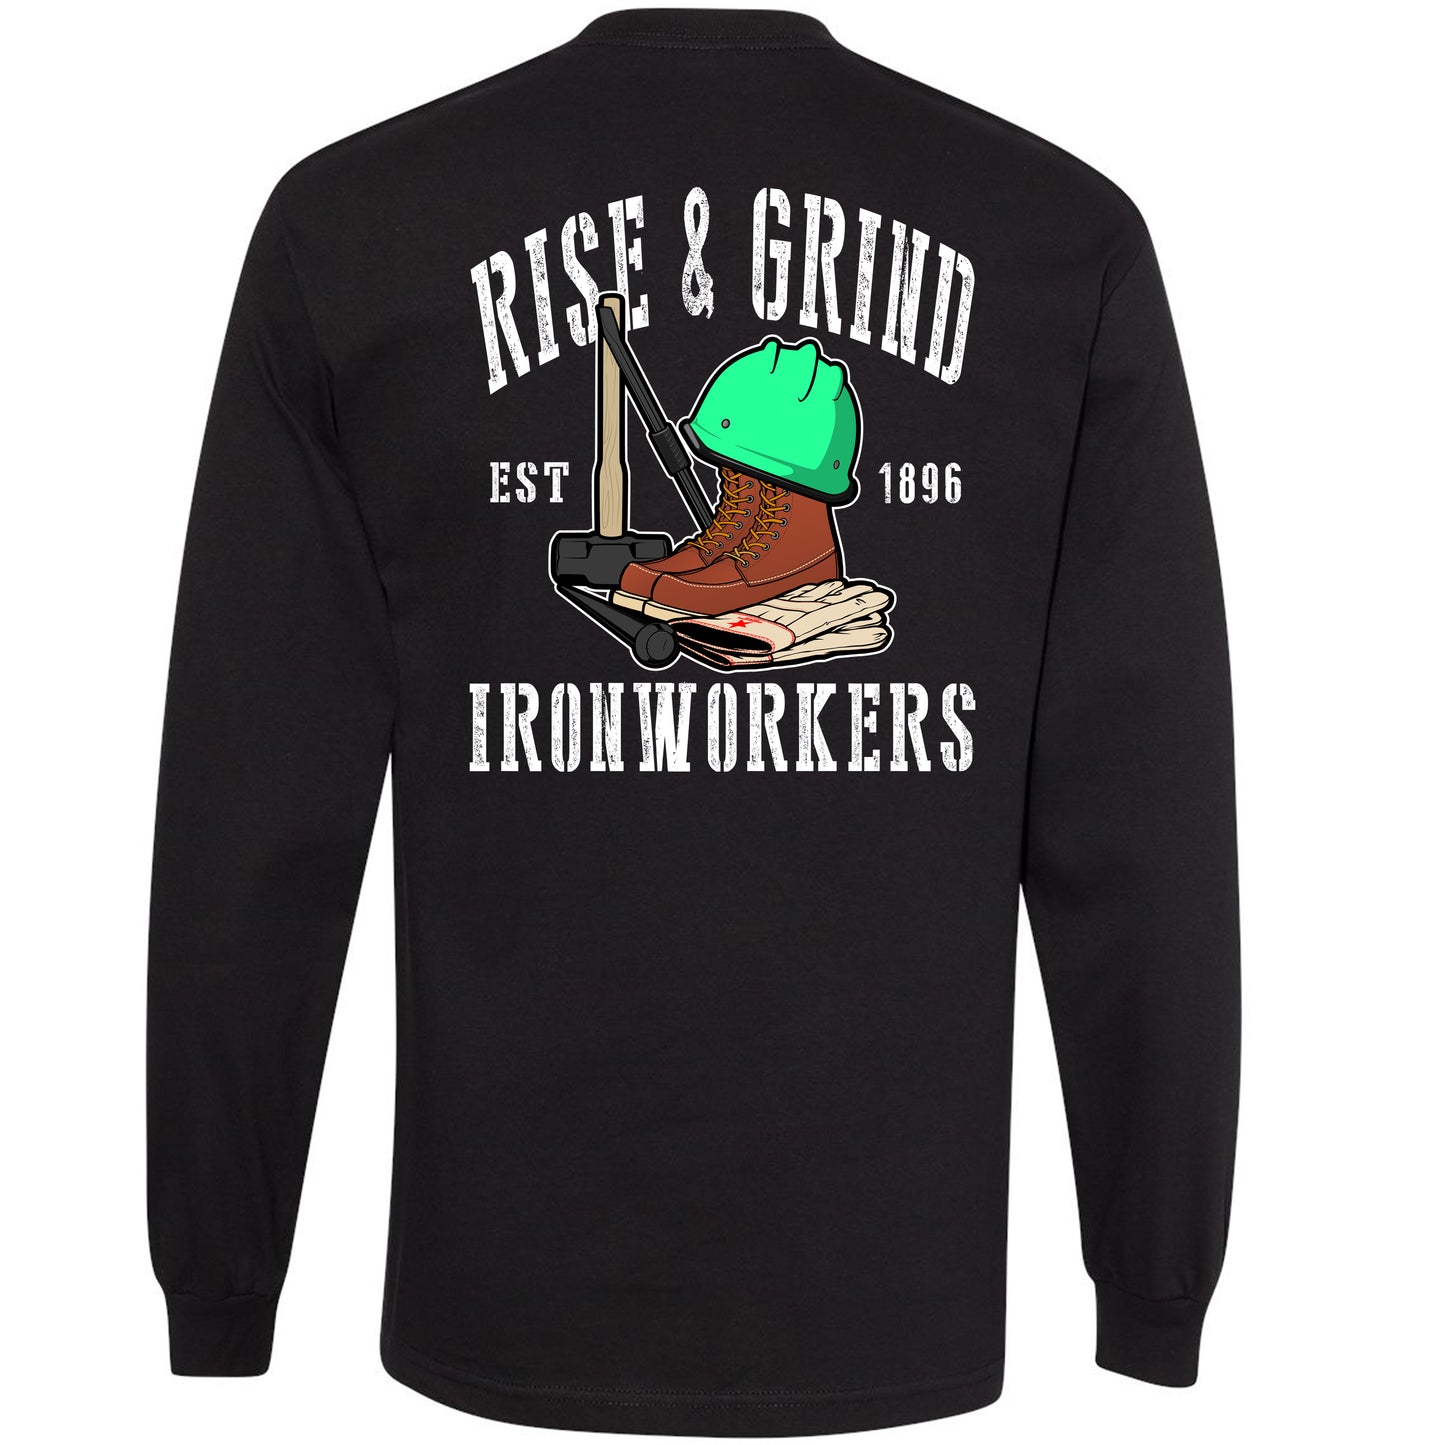 RISE AND GRIND LONG SLEEVE